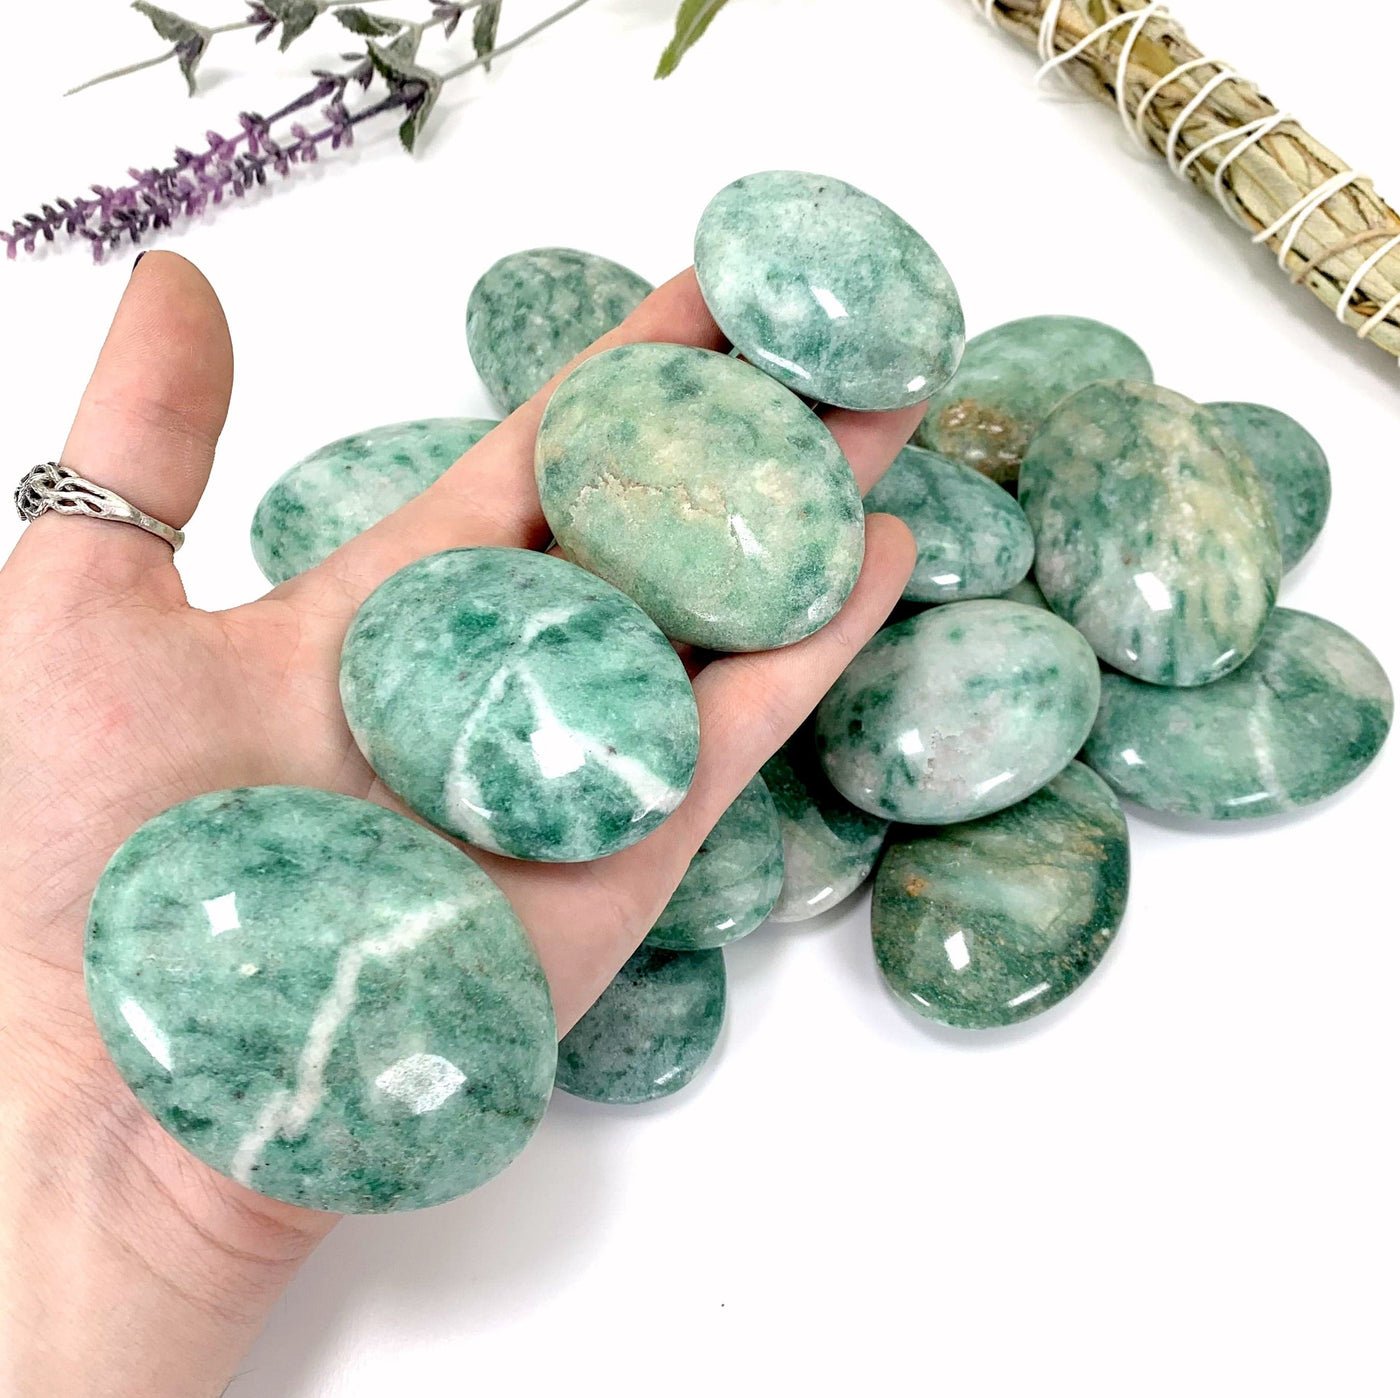 4 palm stones in hand with white background